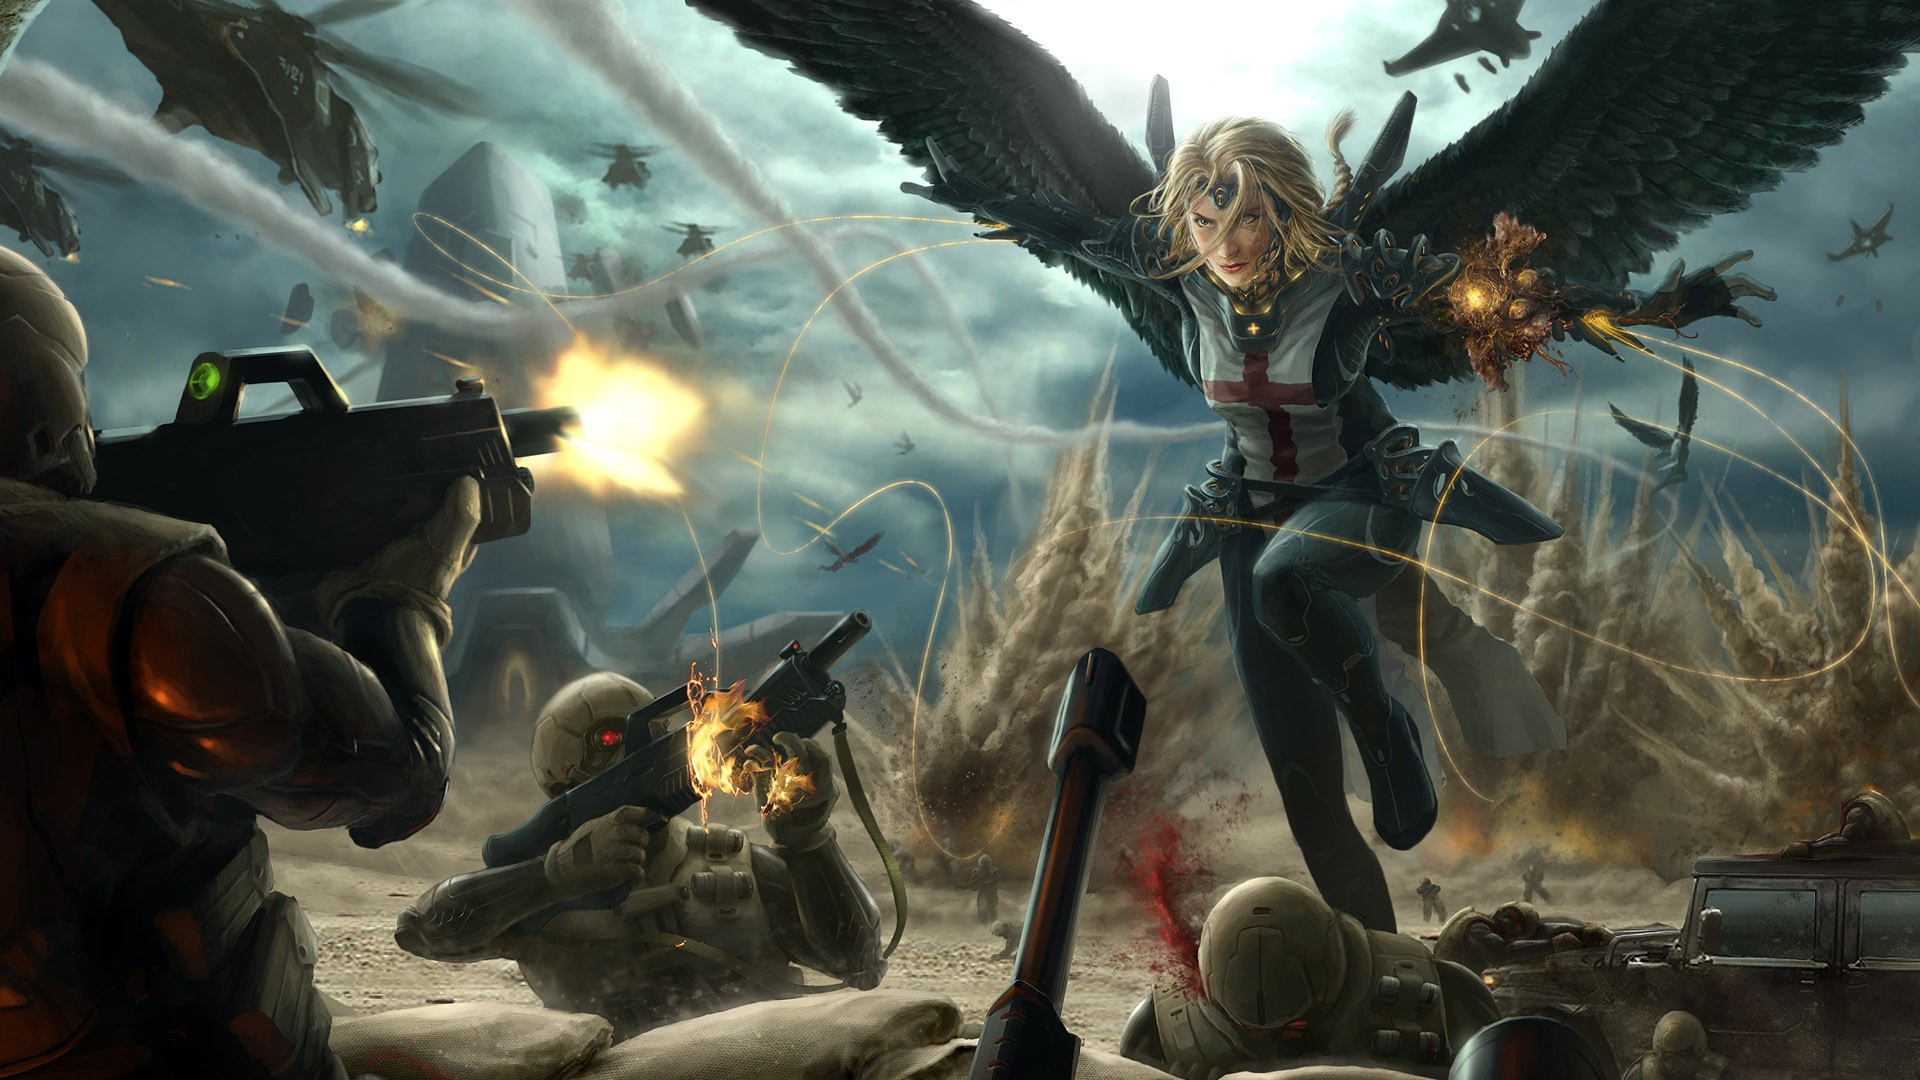 General 1920x1080 futuristic angel fantasy girl blonde battle blood military helicopters women weapon science fiction science fiction women